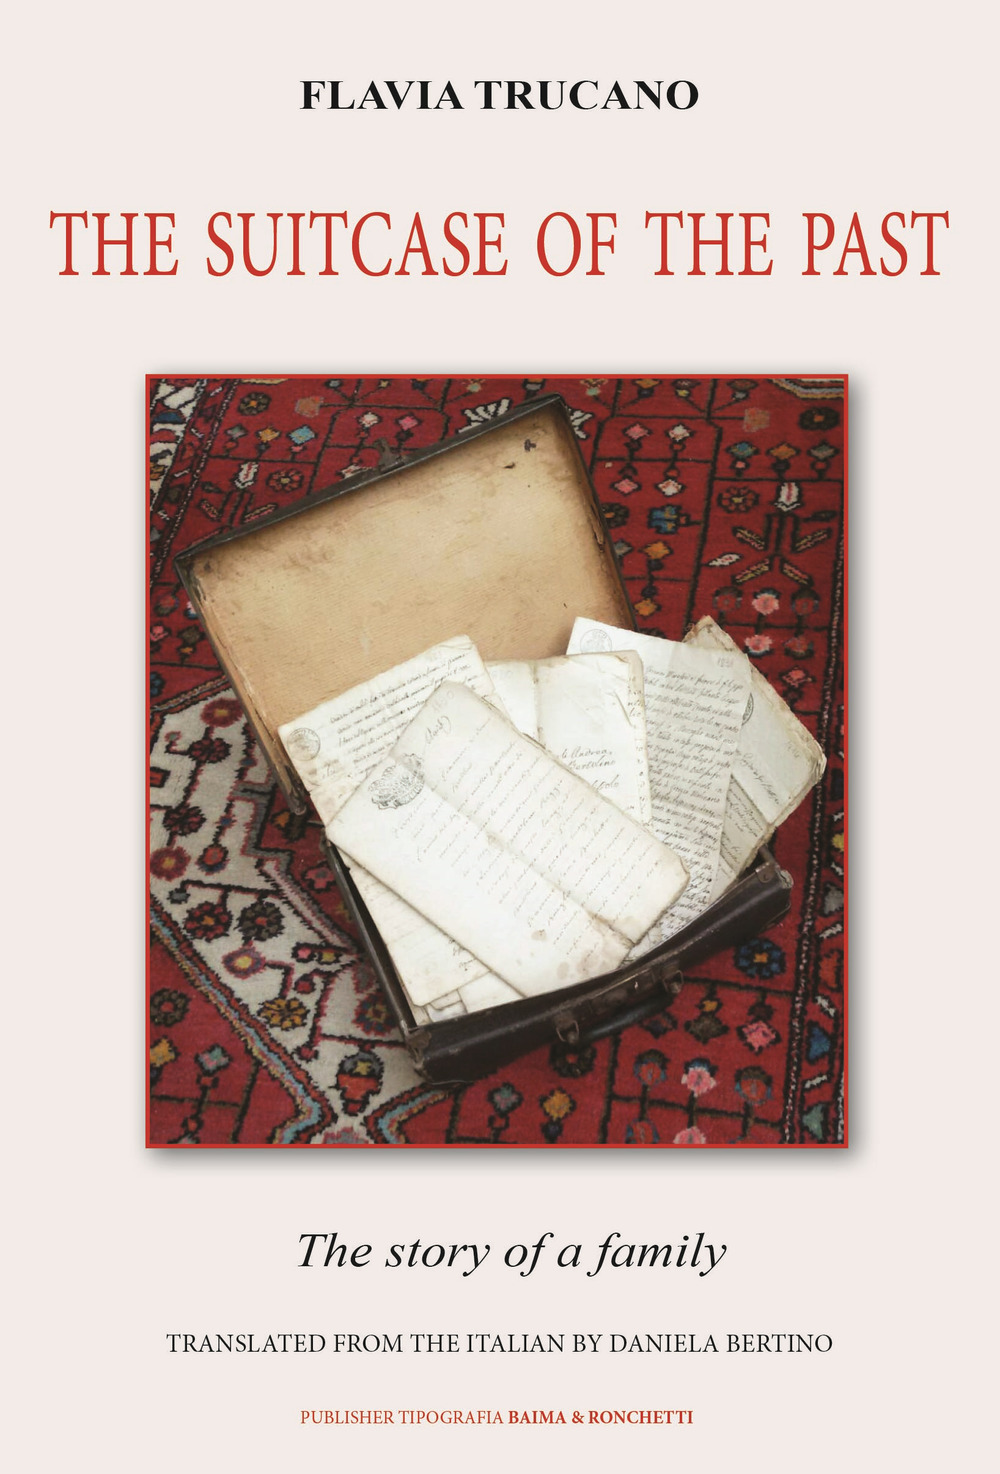 The suitcase of the past. The story of a family